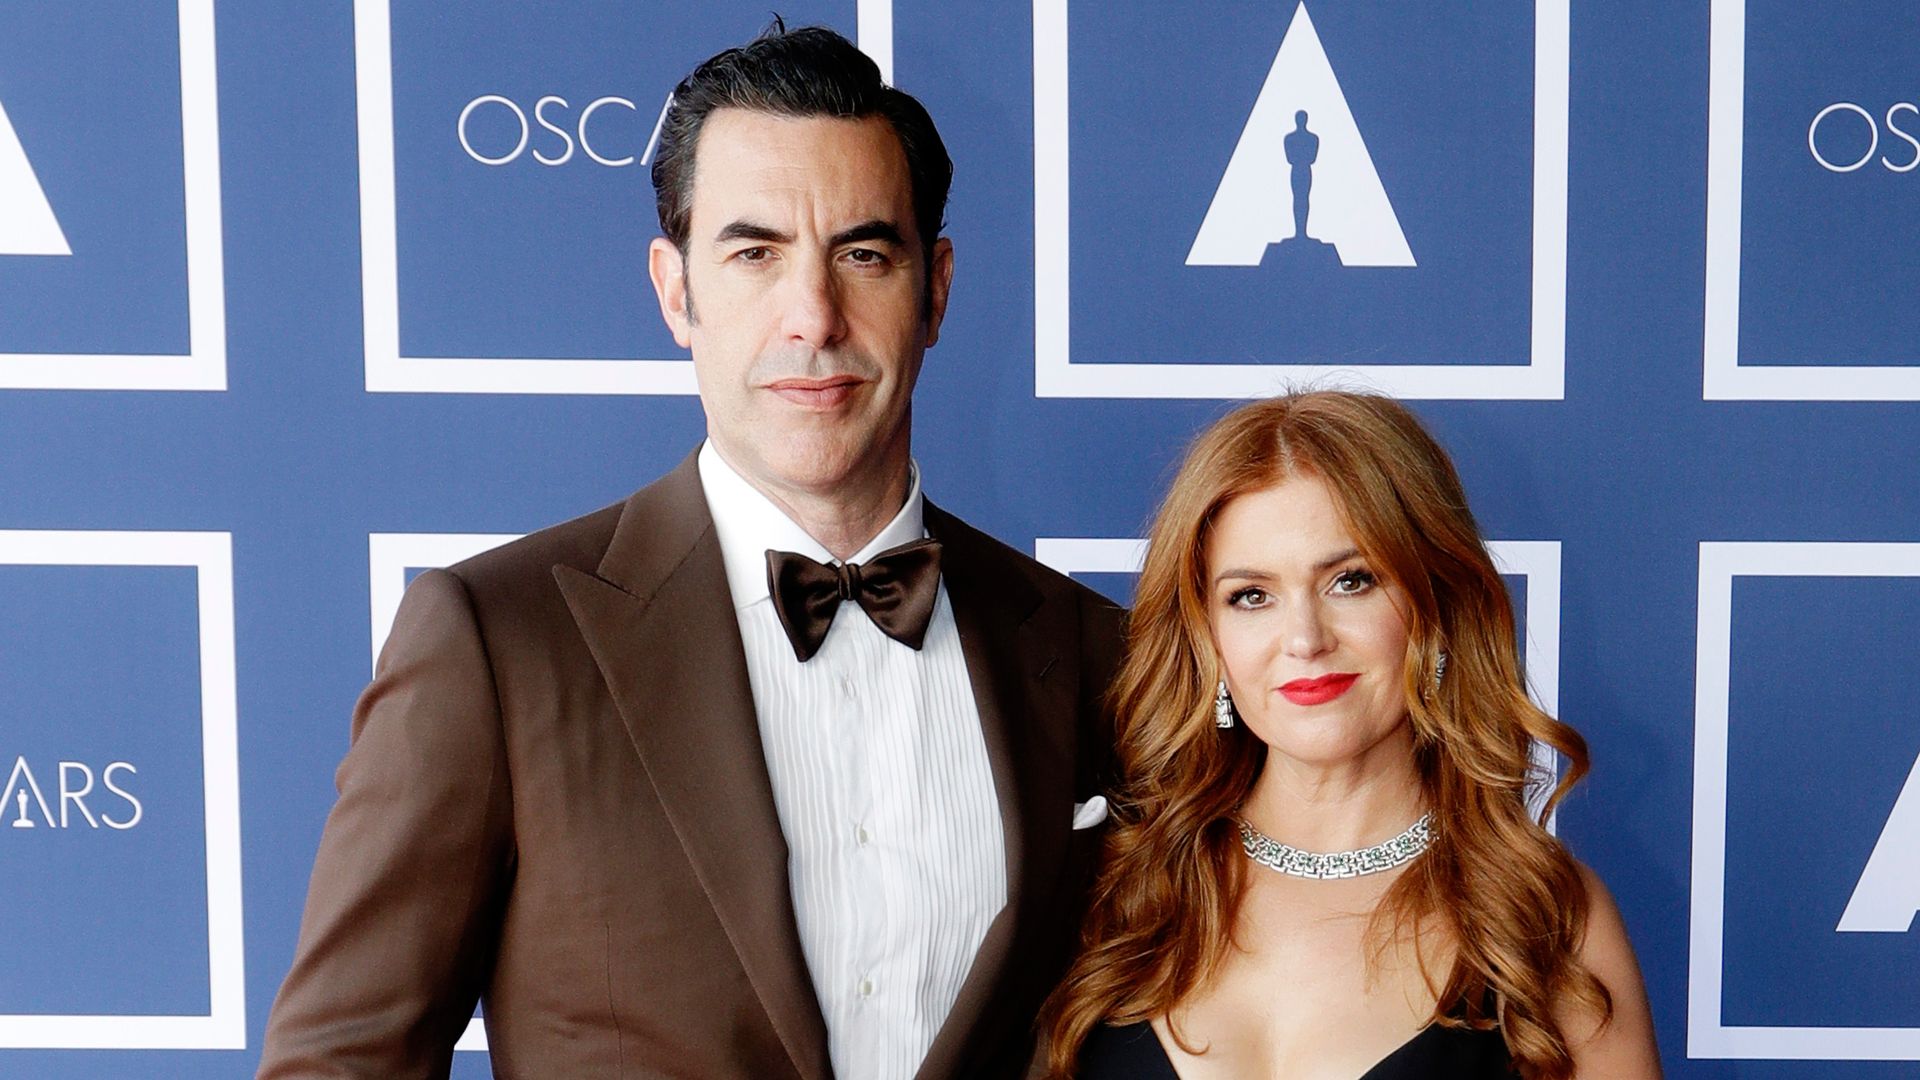 Sacha Baron Cohen and Isla Fisher attend a screening of the Oscars on Monday, April 26, 2021 in Sydney, Australia.